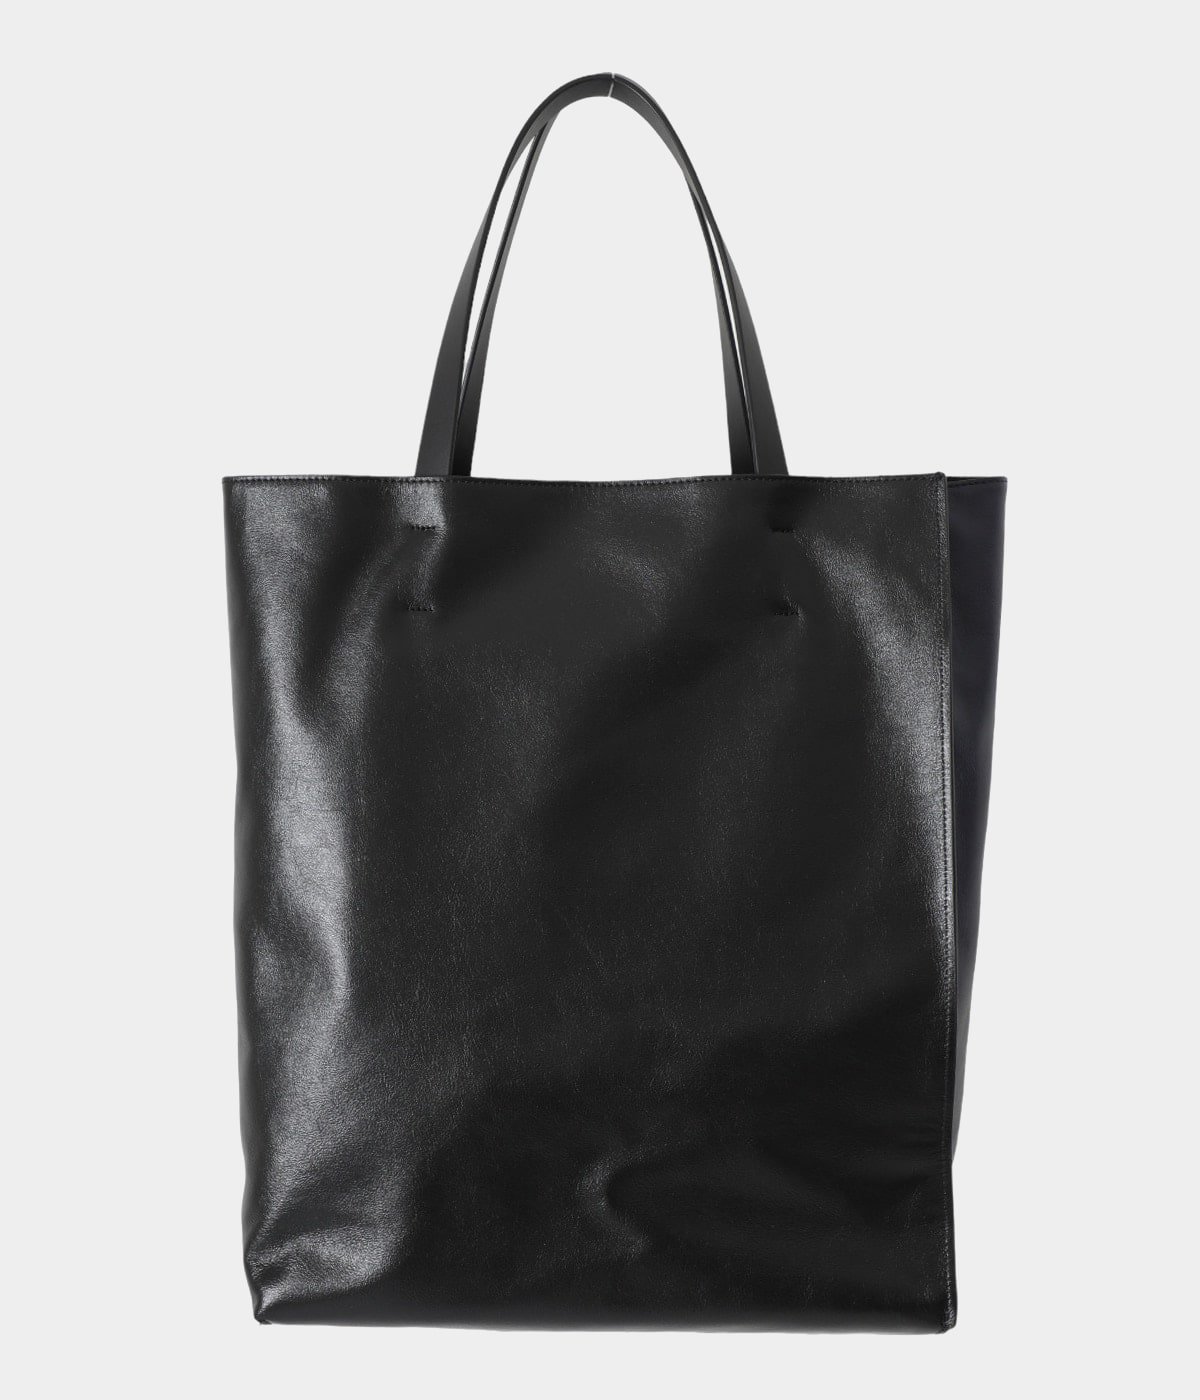 MUSEO SOFT LARGE TOTE | MARNI(マルニ) / バッグ トートバッグ 